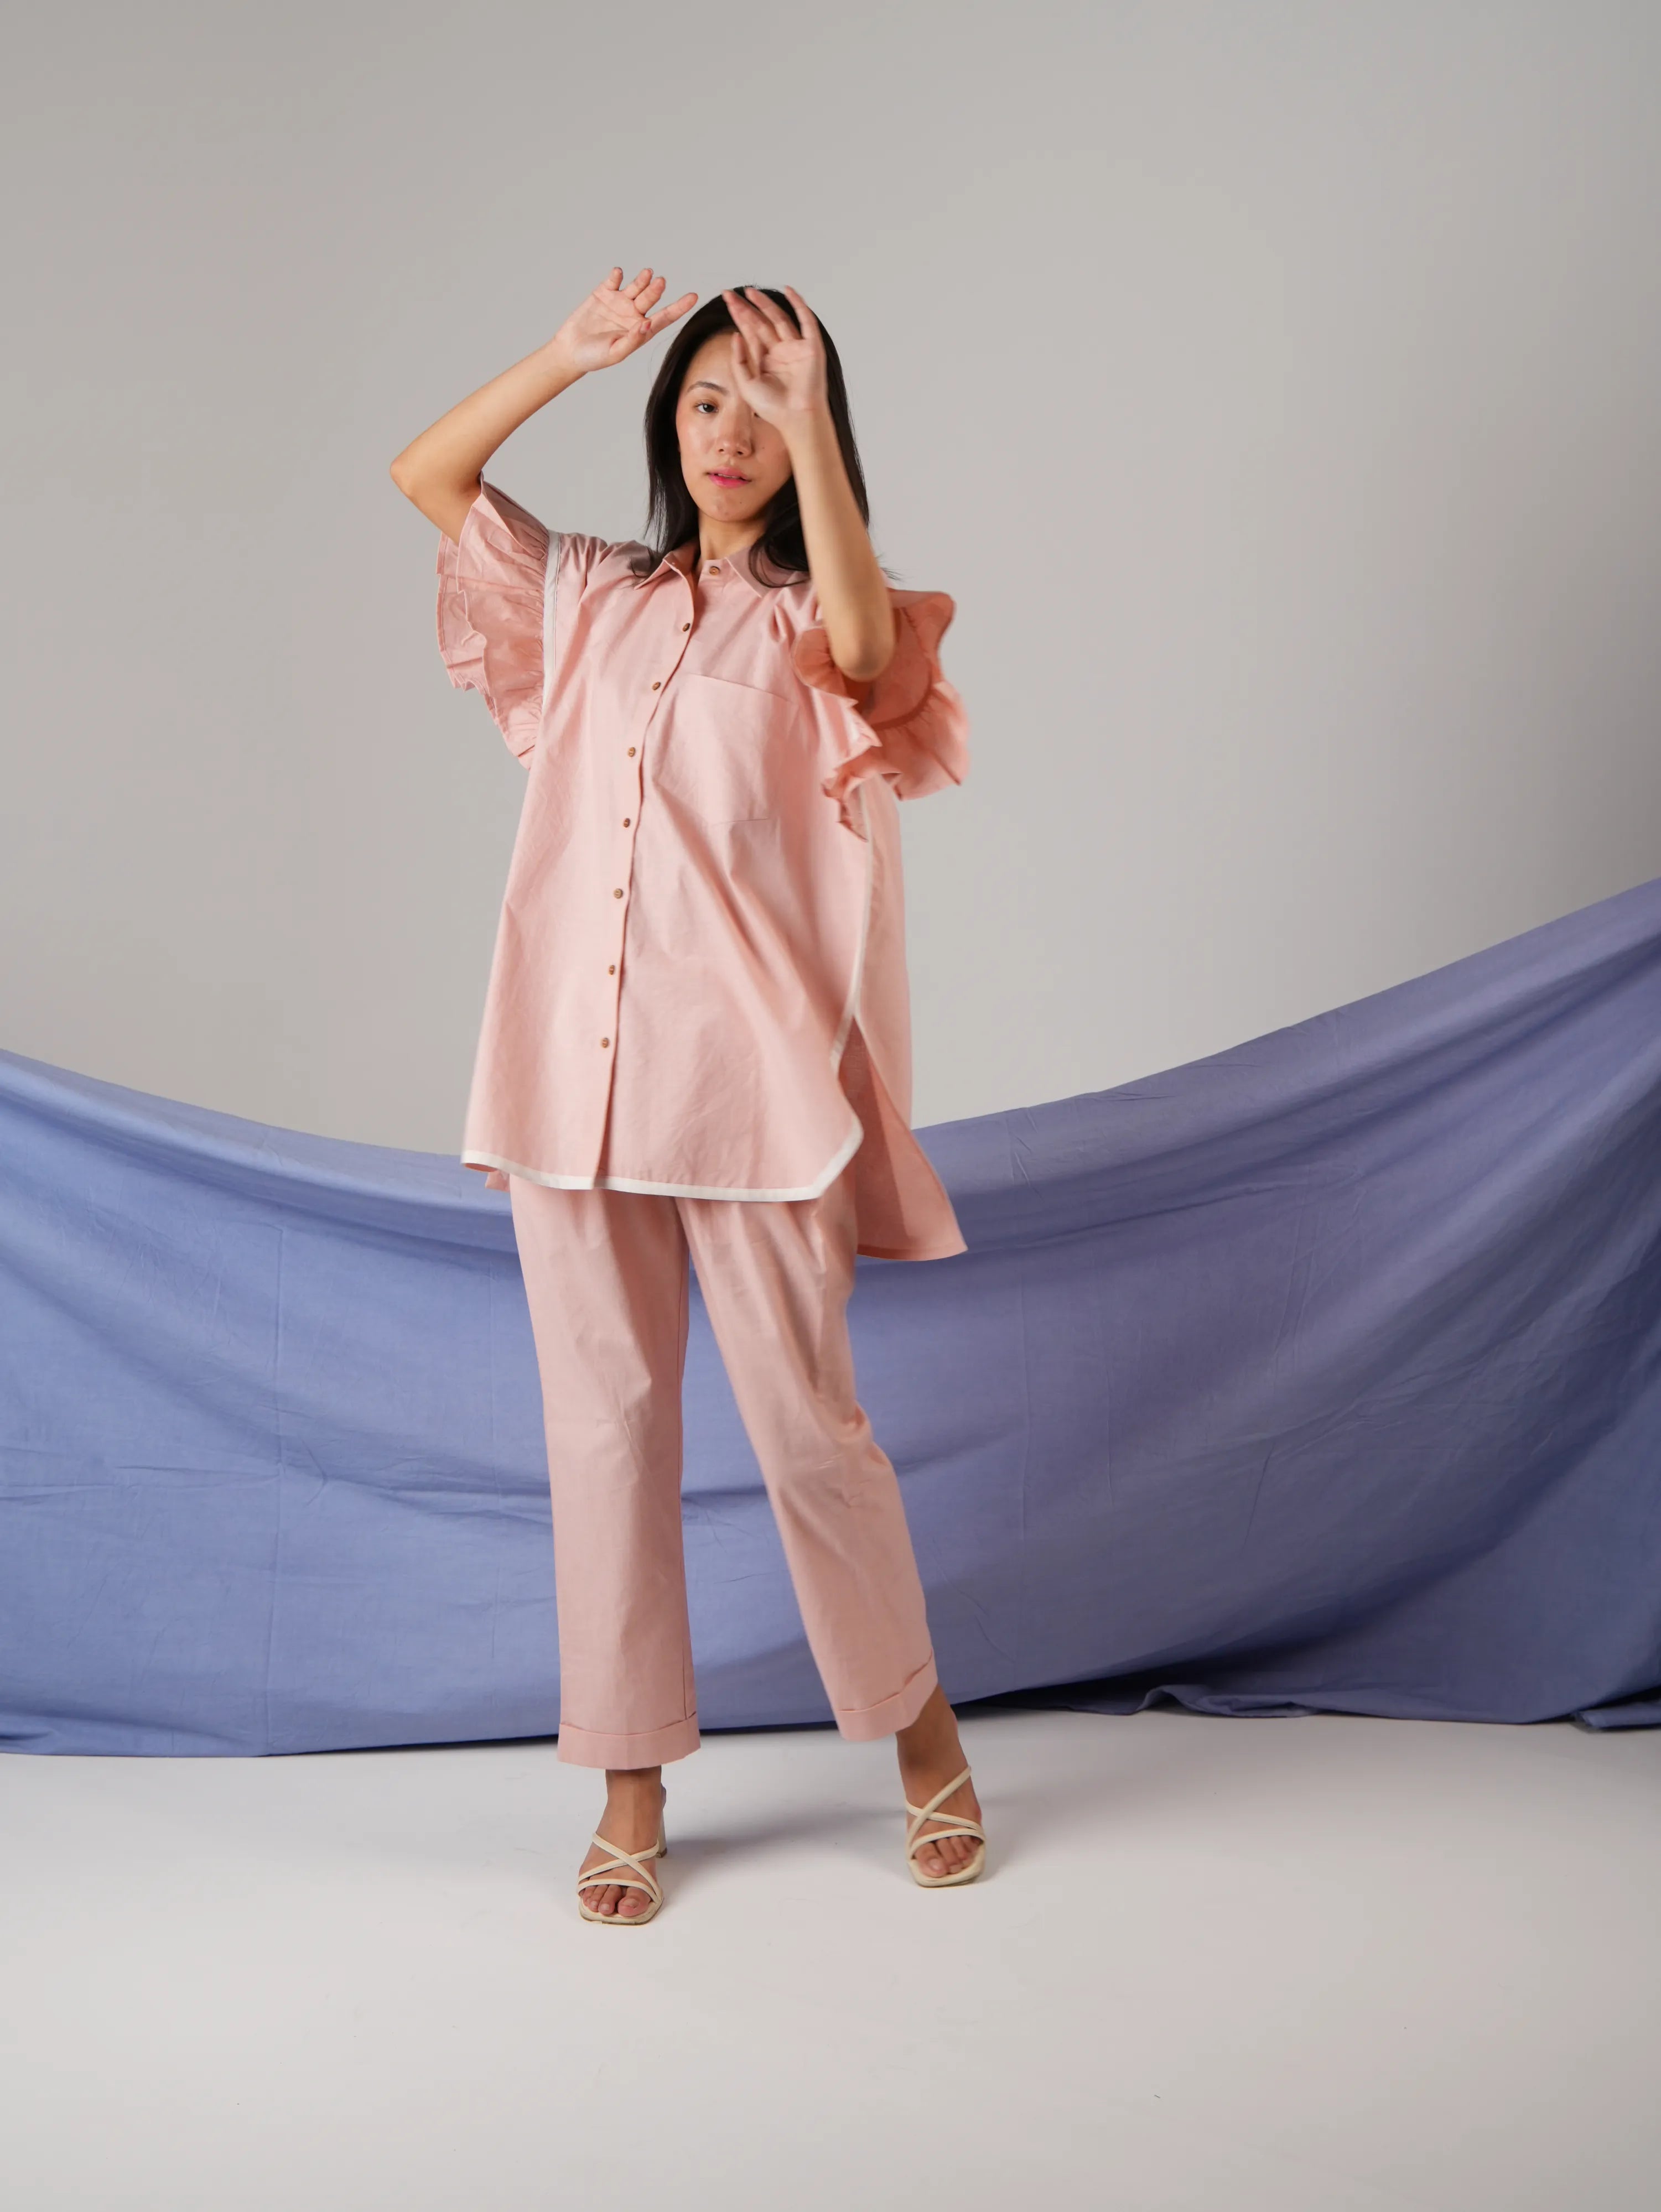 Vanshitaaz Icy Pink Anti-fit Cotton Co-ord set with White Stripes Detailing